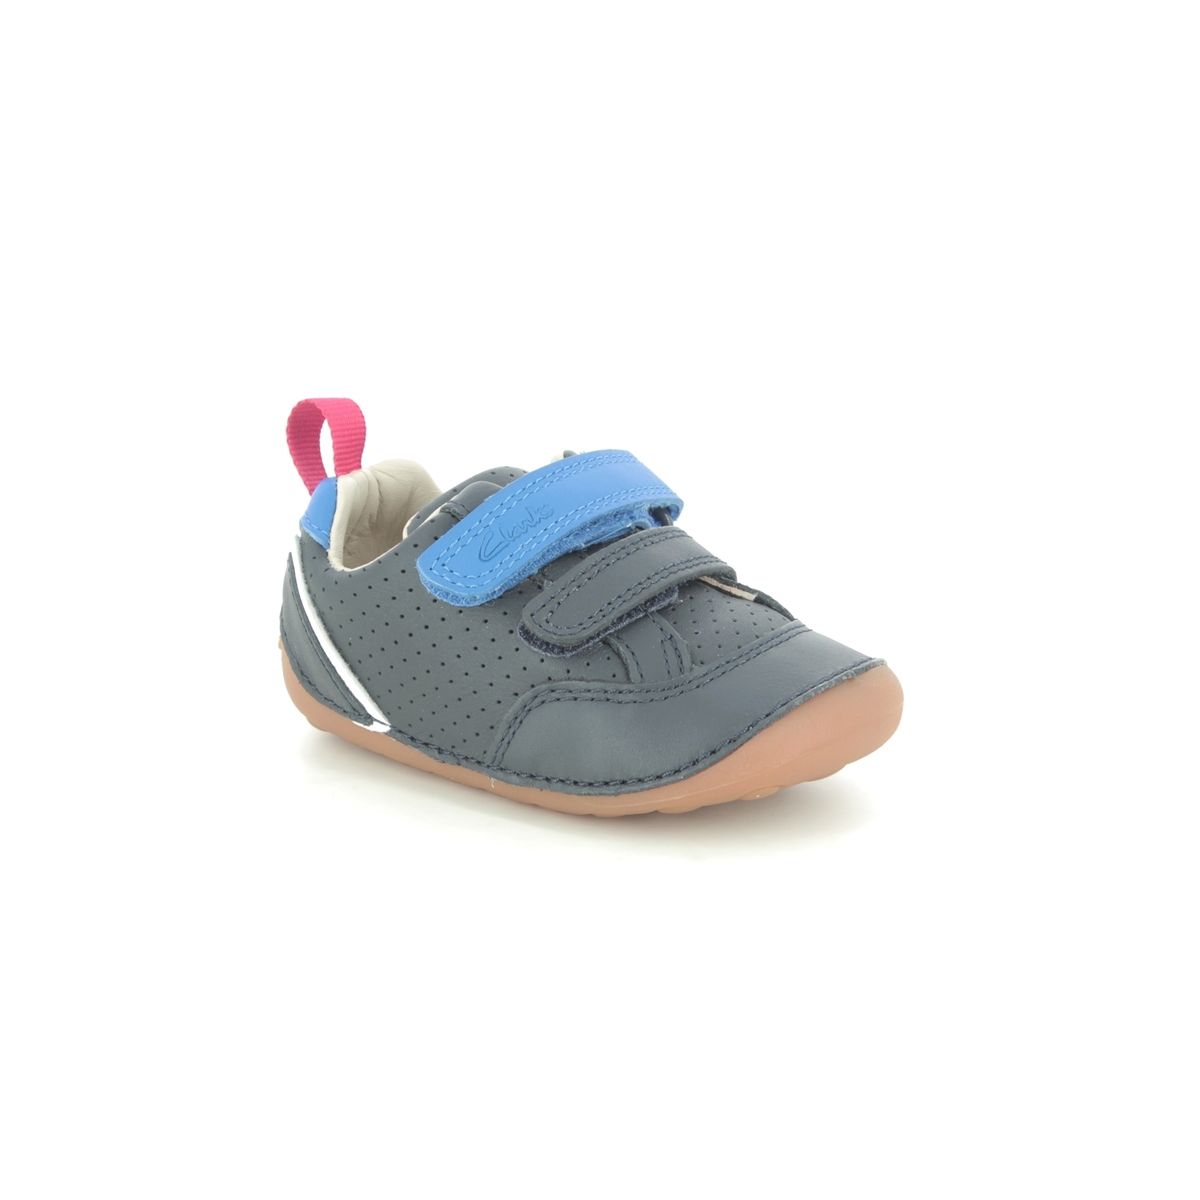 Clarks Tiny Sky T Navy Leather Kids Boys First And Toddler 576297G In Size 3 In Plain Navy Leather G Width Fitting For kids